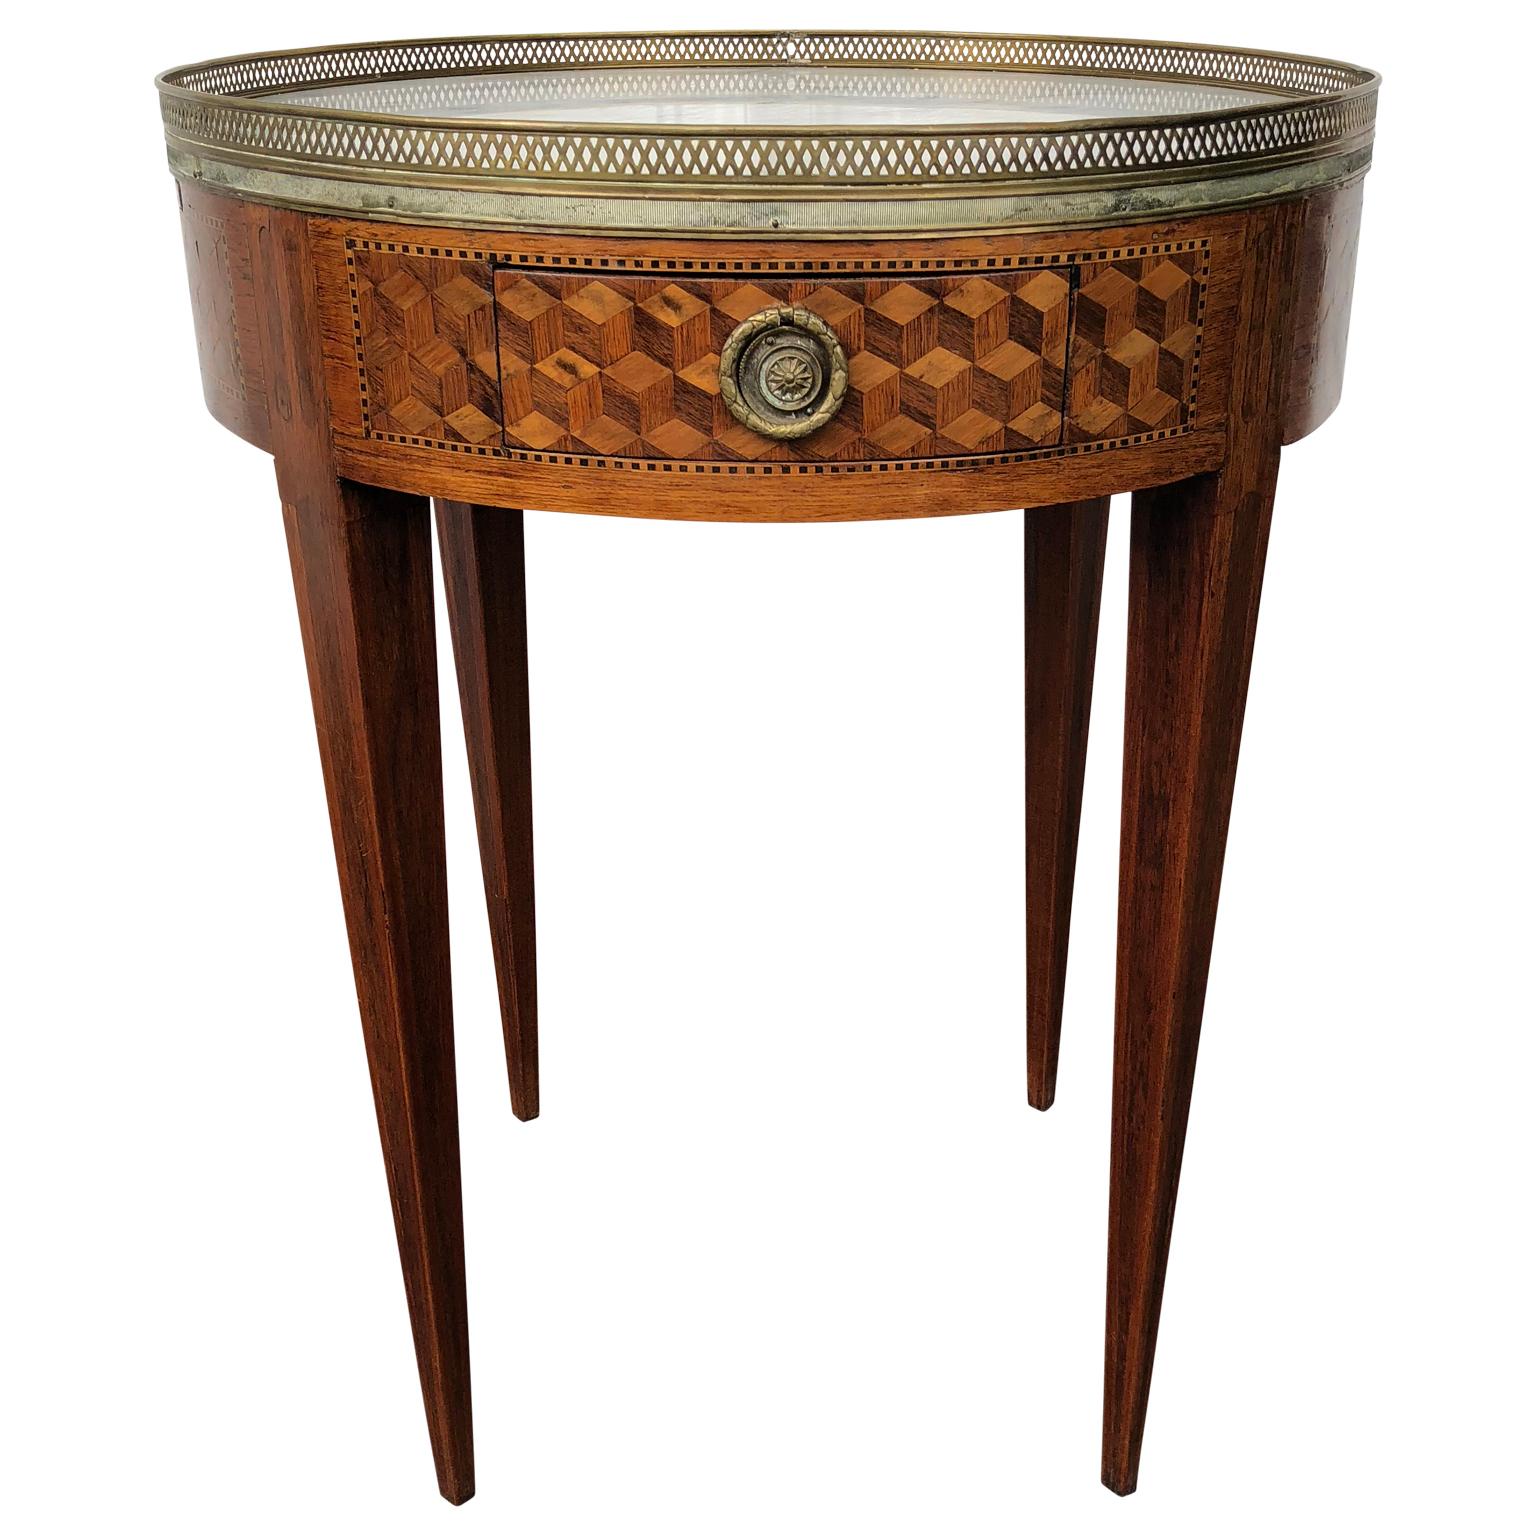 Early 19th century Louis XVI French marquetry bouillotte table.
The amazing classic French marquetry pattern is represented in cubes of satin and lemon wood.